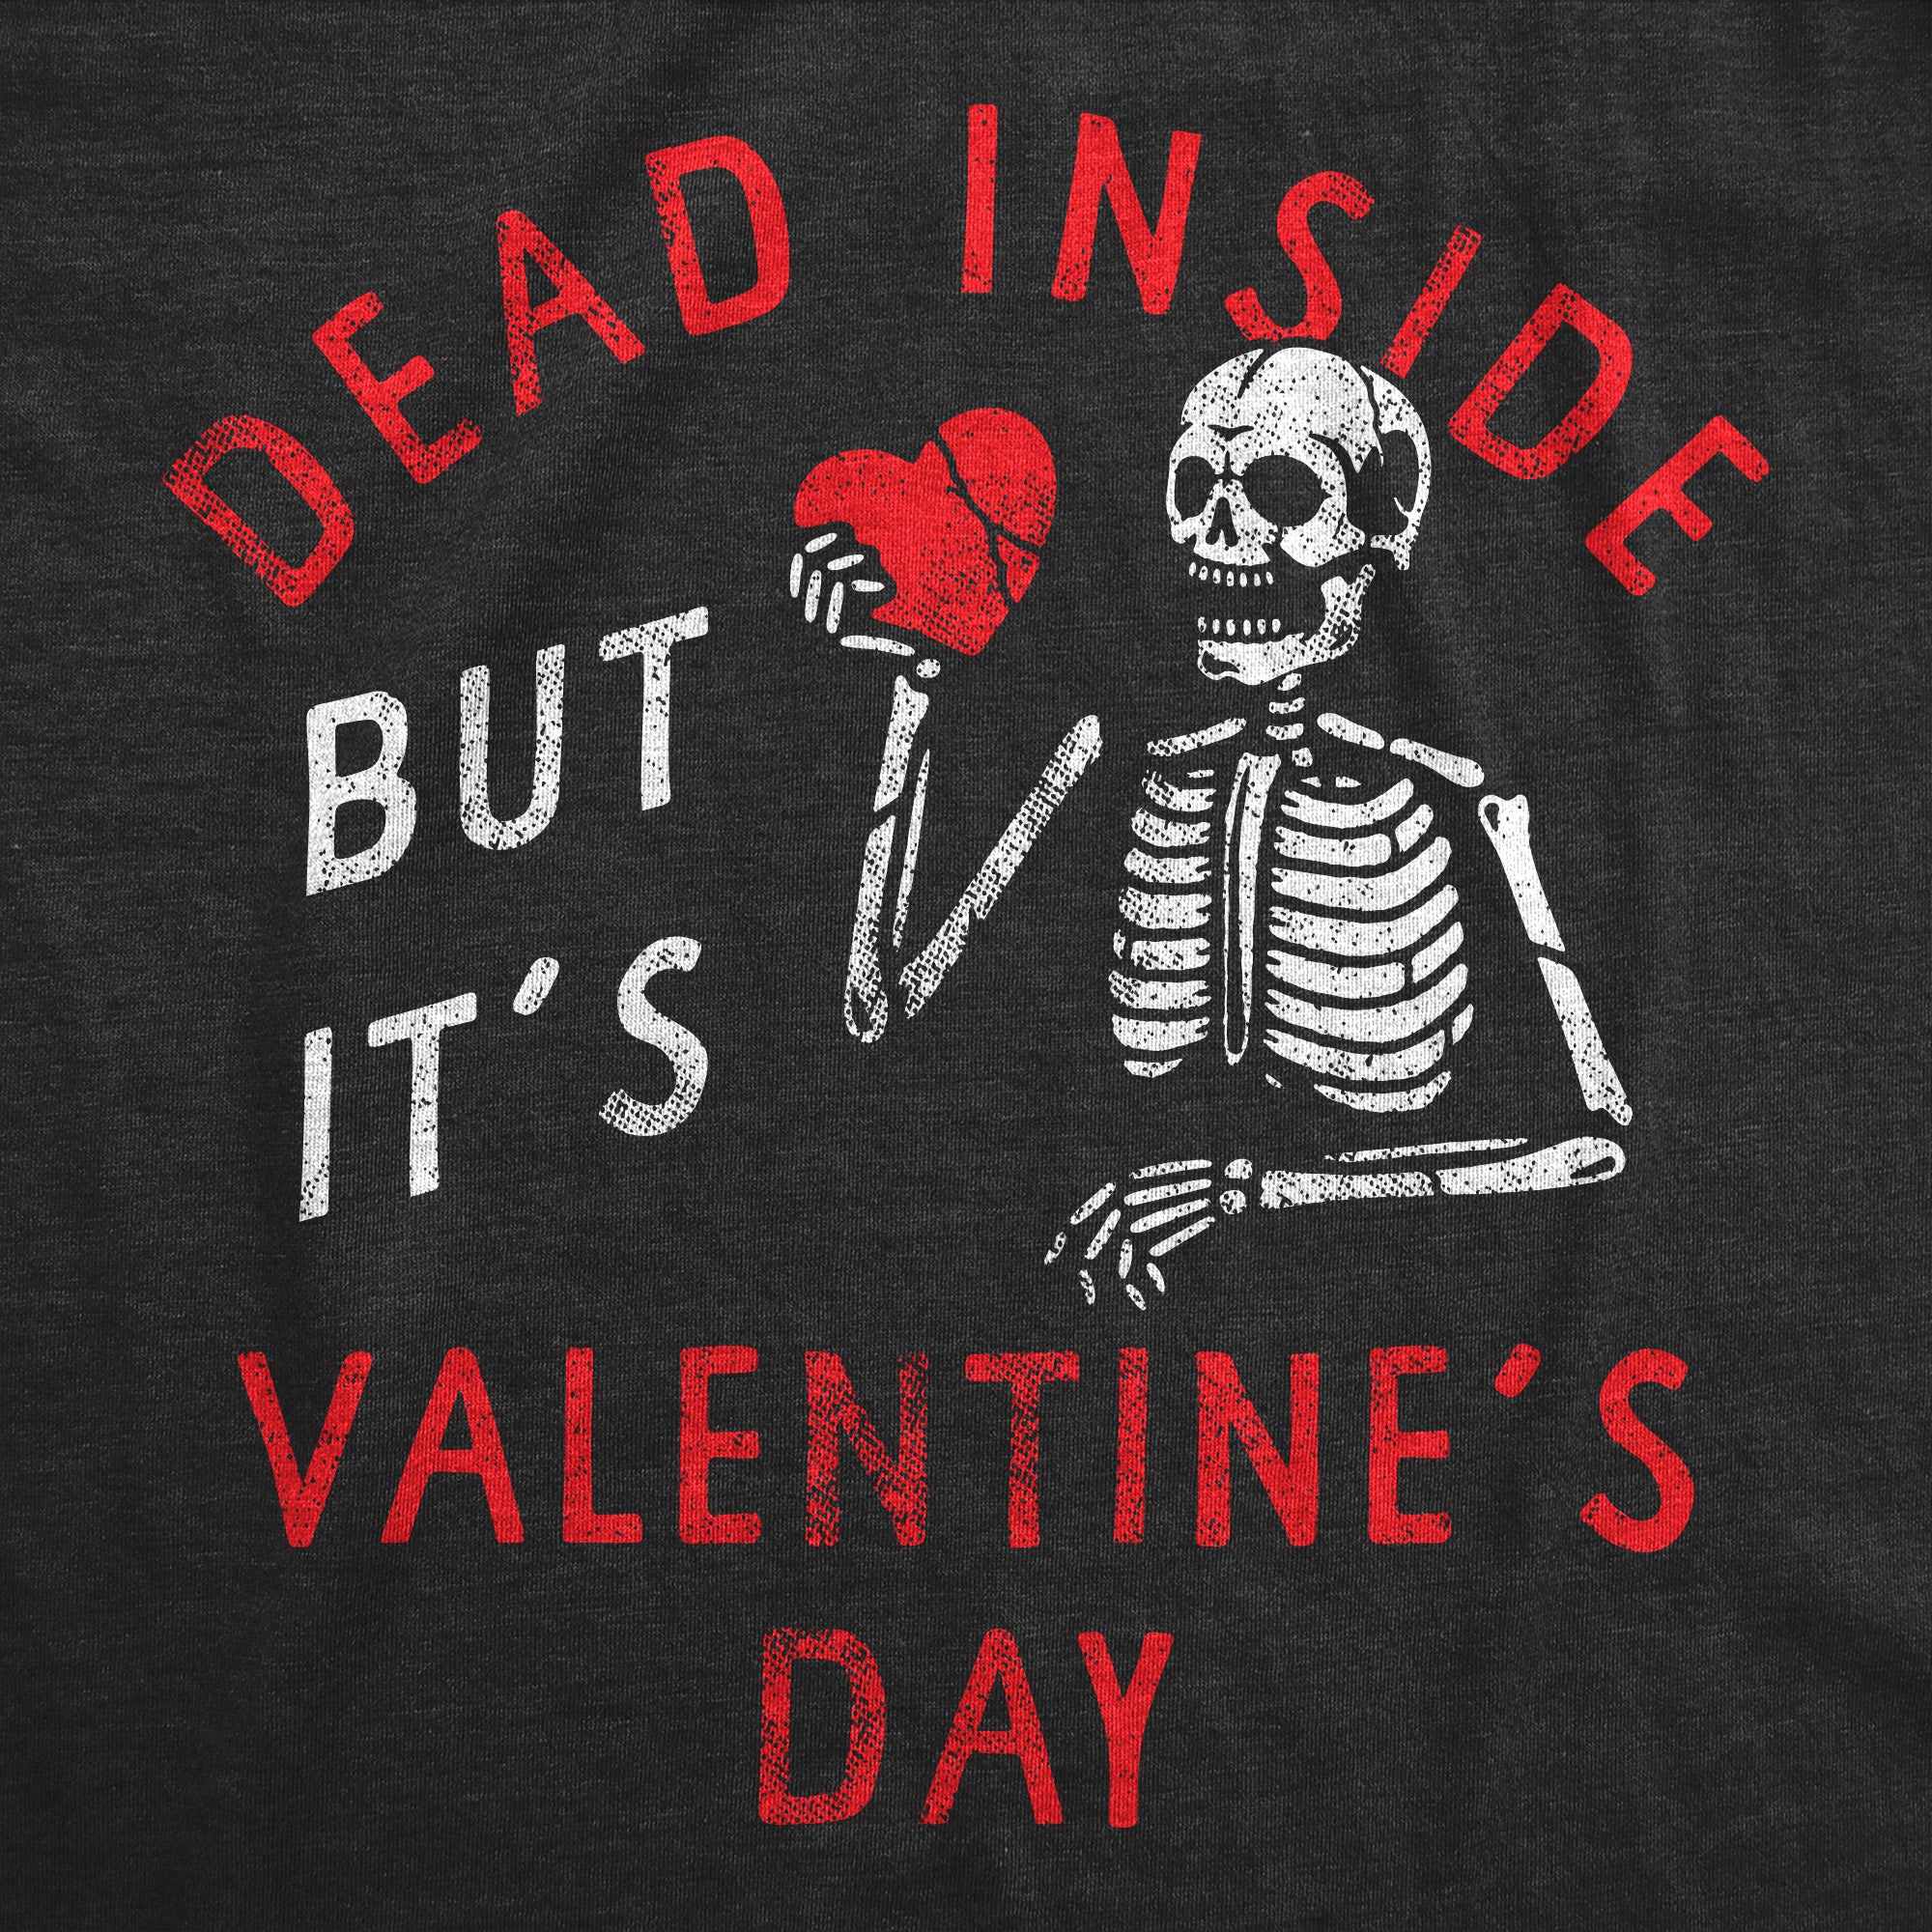 Funny Heather Black - Dead Inside Valentines Day Dead Inside But Its Valentines Day Mens T Shirt Nerdy Valentine's Day Sarcastic Tee